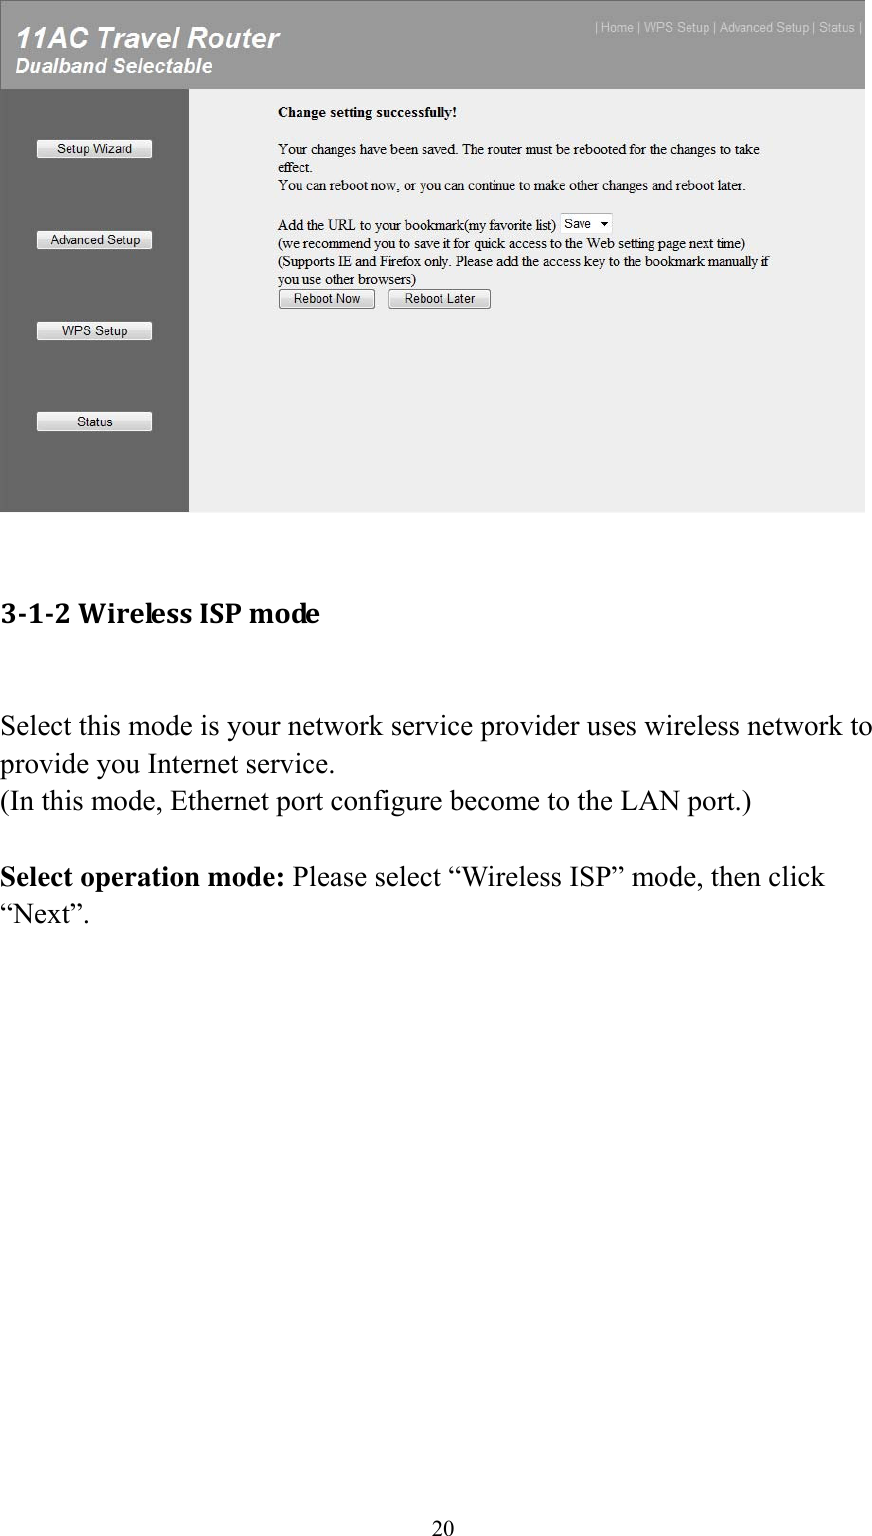 20   3‐1‐2WirelessISPmode Select this mode is your network service provider uses wireless network to provide you Internet service. (In this mode, Ethernet port configure become to the LAN port.)  Select operation mode: Please select “Wireless ISP” mode, then click “Next”.  